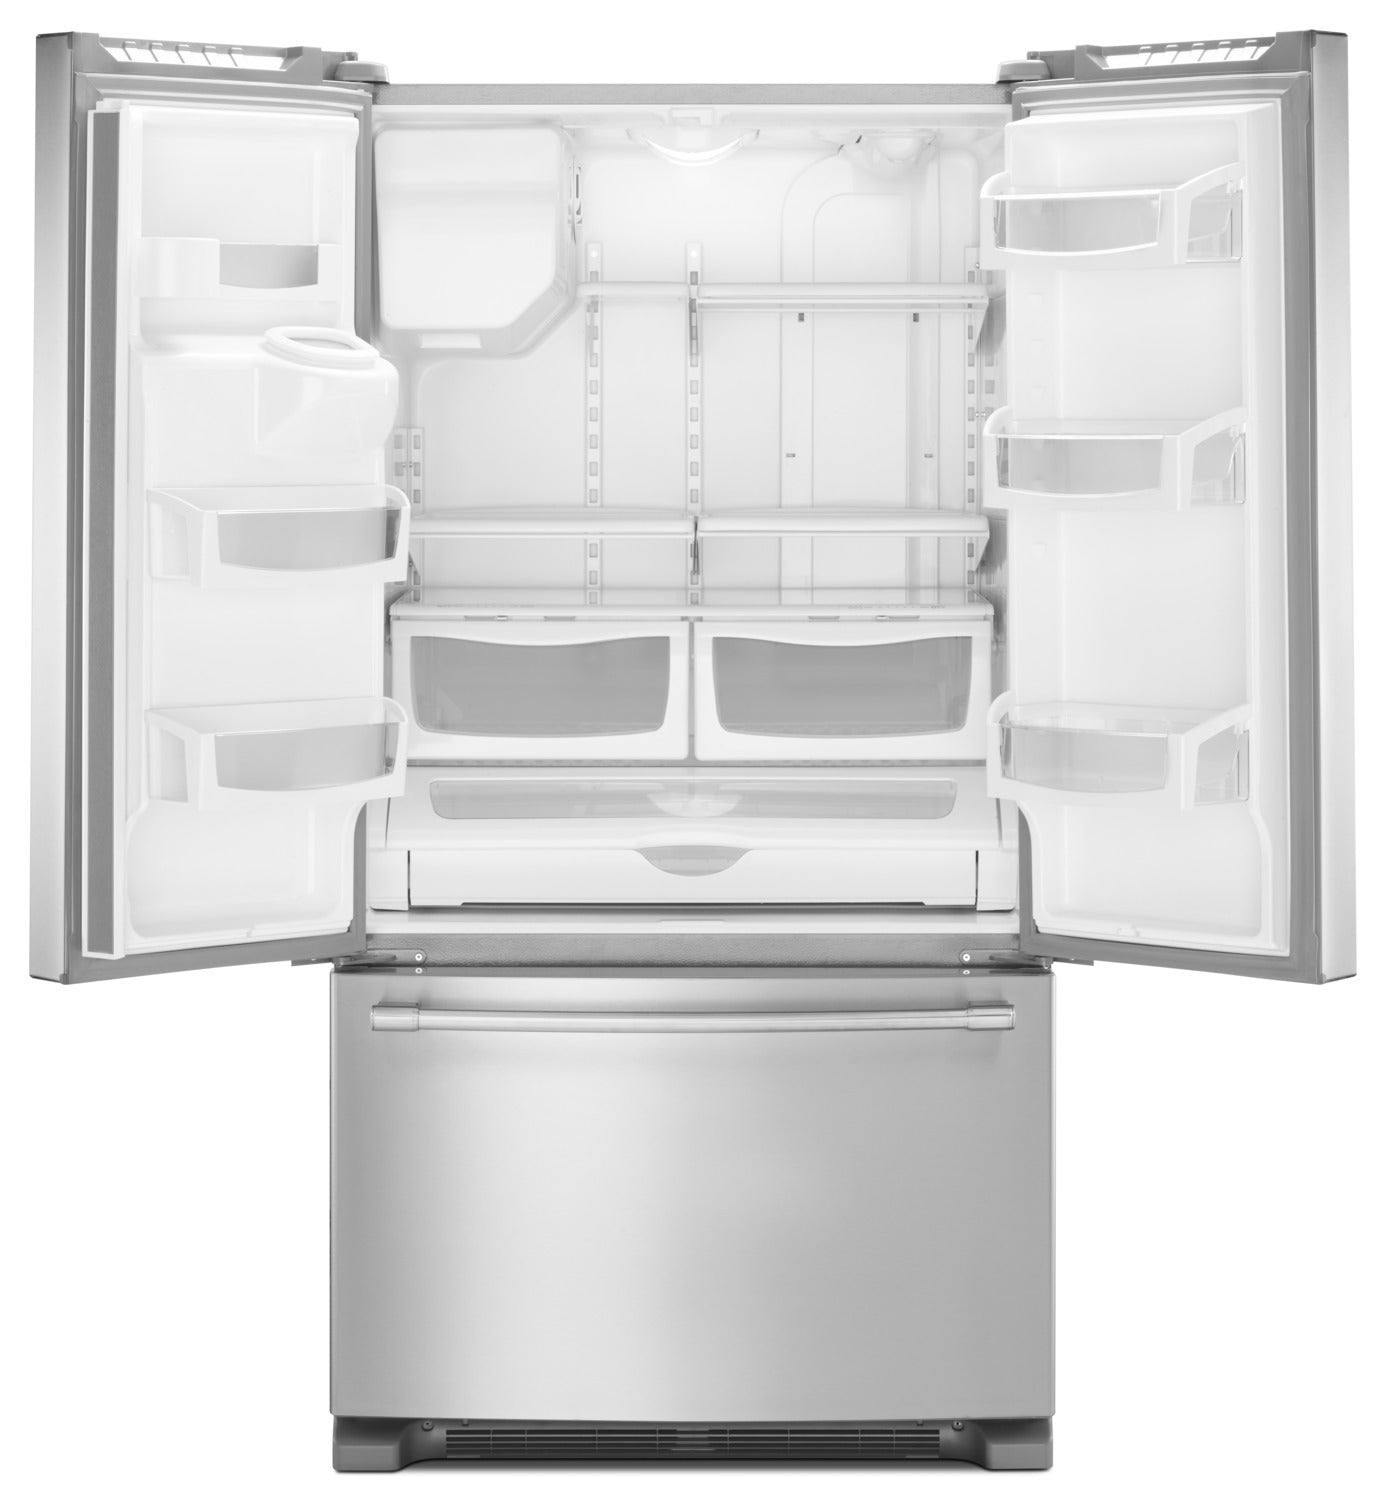 Maytag Stainless Steel French Door Refrigerator (25 Cu. Ft.) - MFI2570FEZ